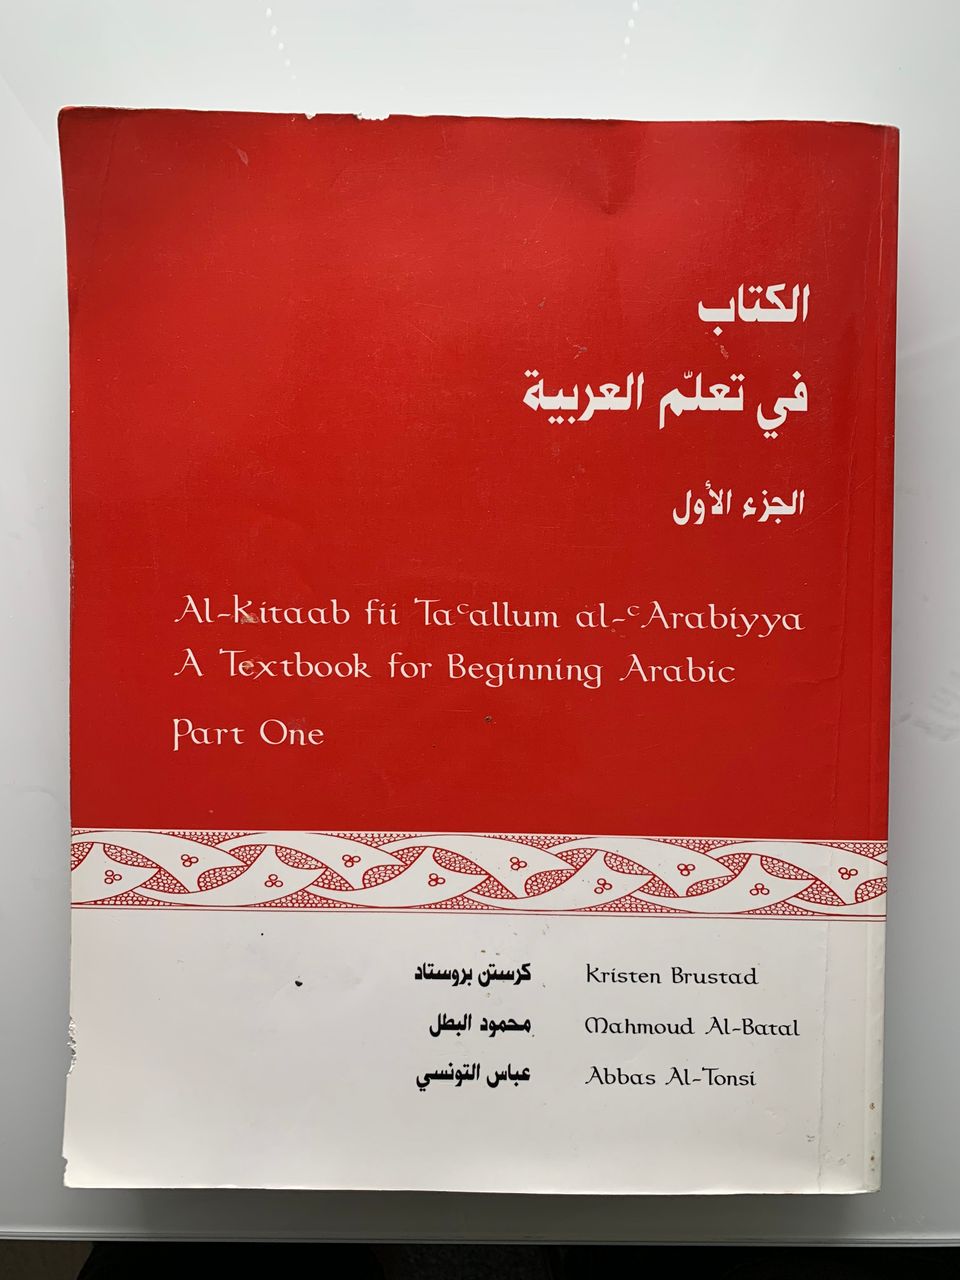 A Textbook for Beginning Arabic, Part One